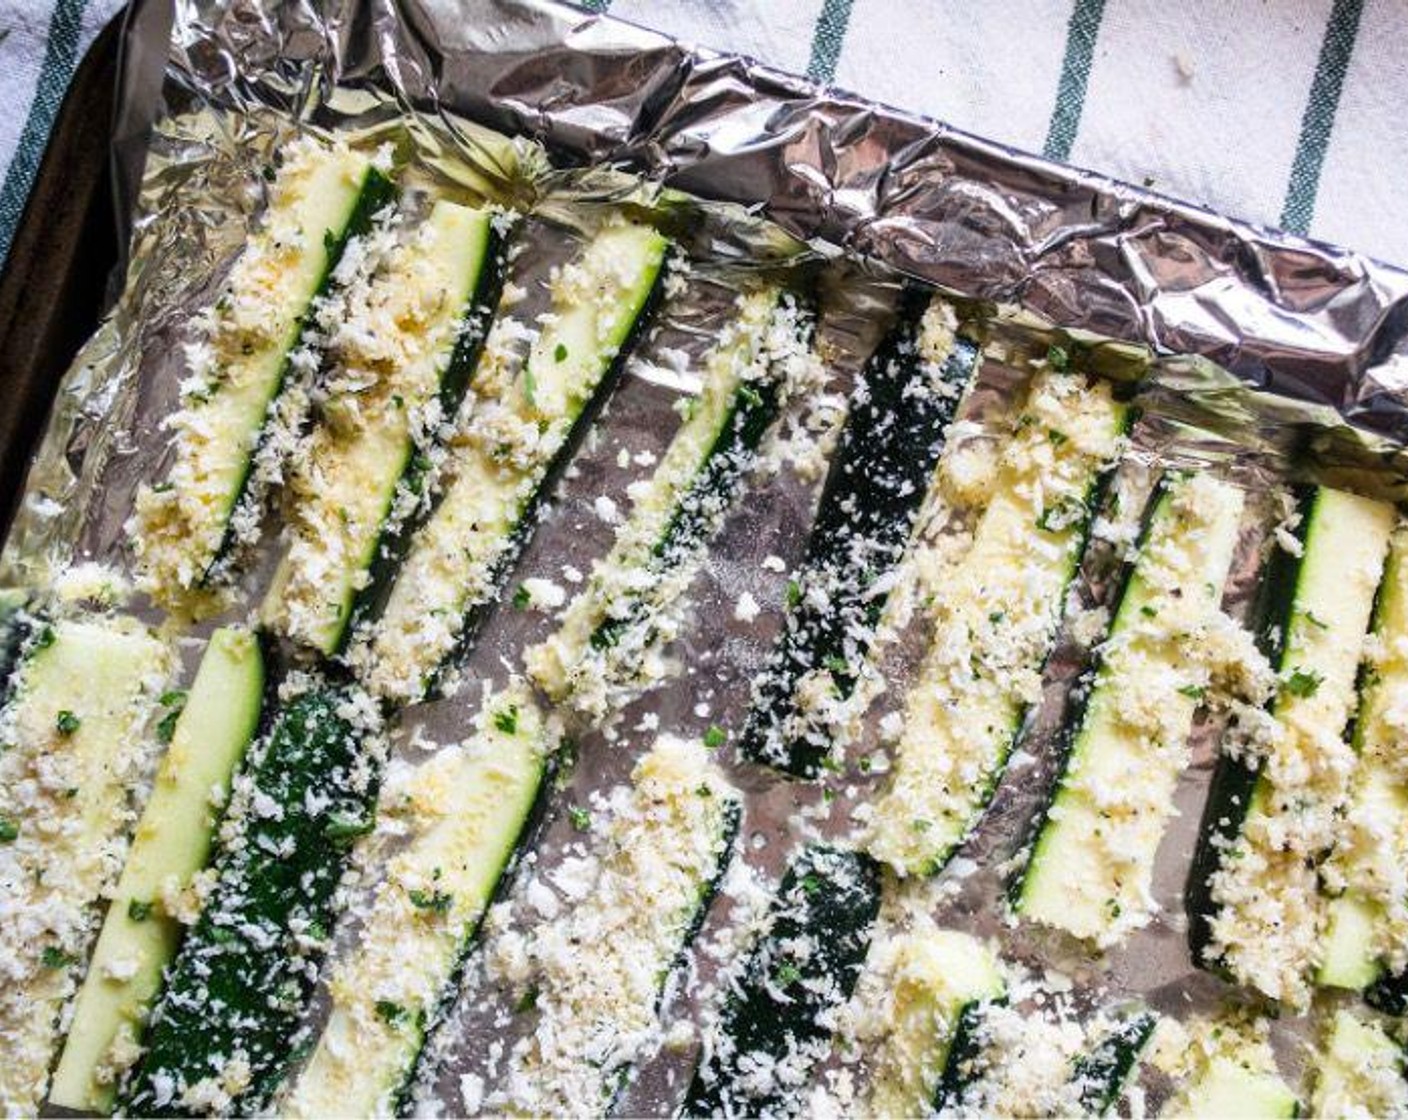 step 6 Remove pan, flip each fry, and bake for an additional 8-10 minutes, or until zucchini is cooked through and breaded outside is crispy and golden brown.